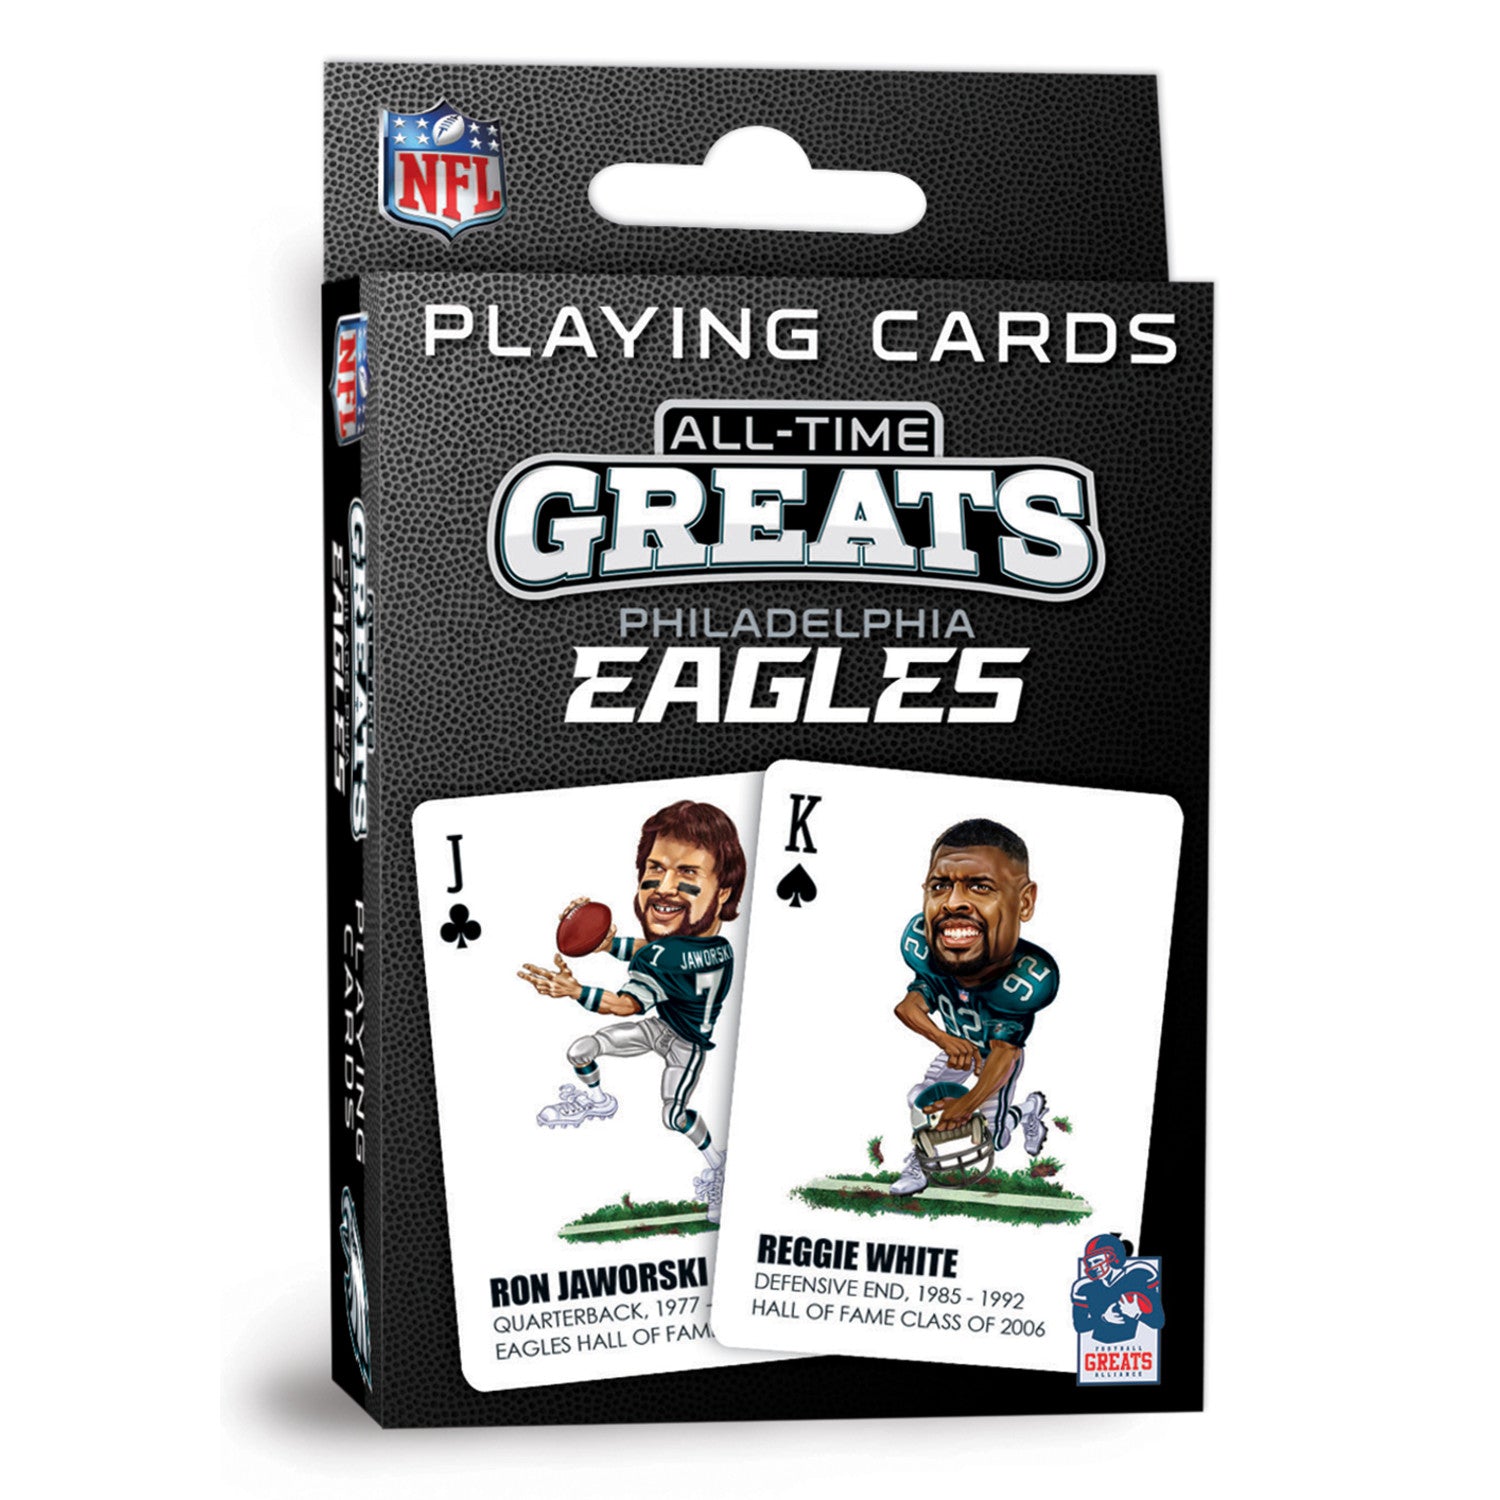 Philadelphia Eagles All-Time Greats Playing Cards - 54 Card Deck